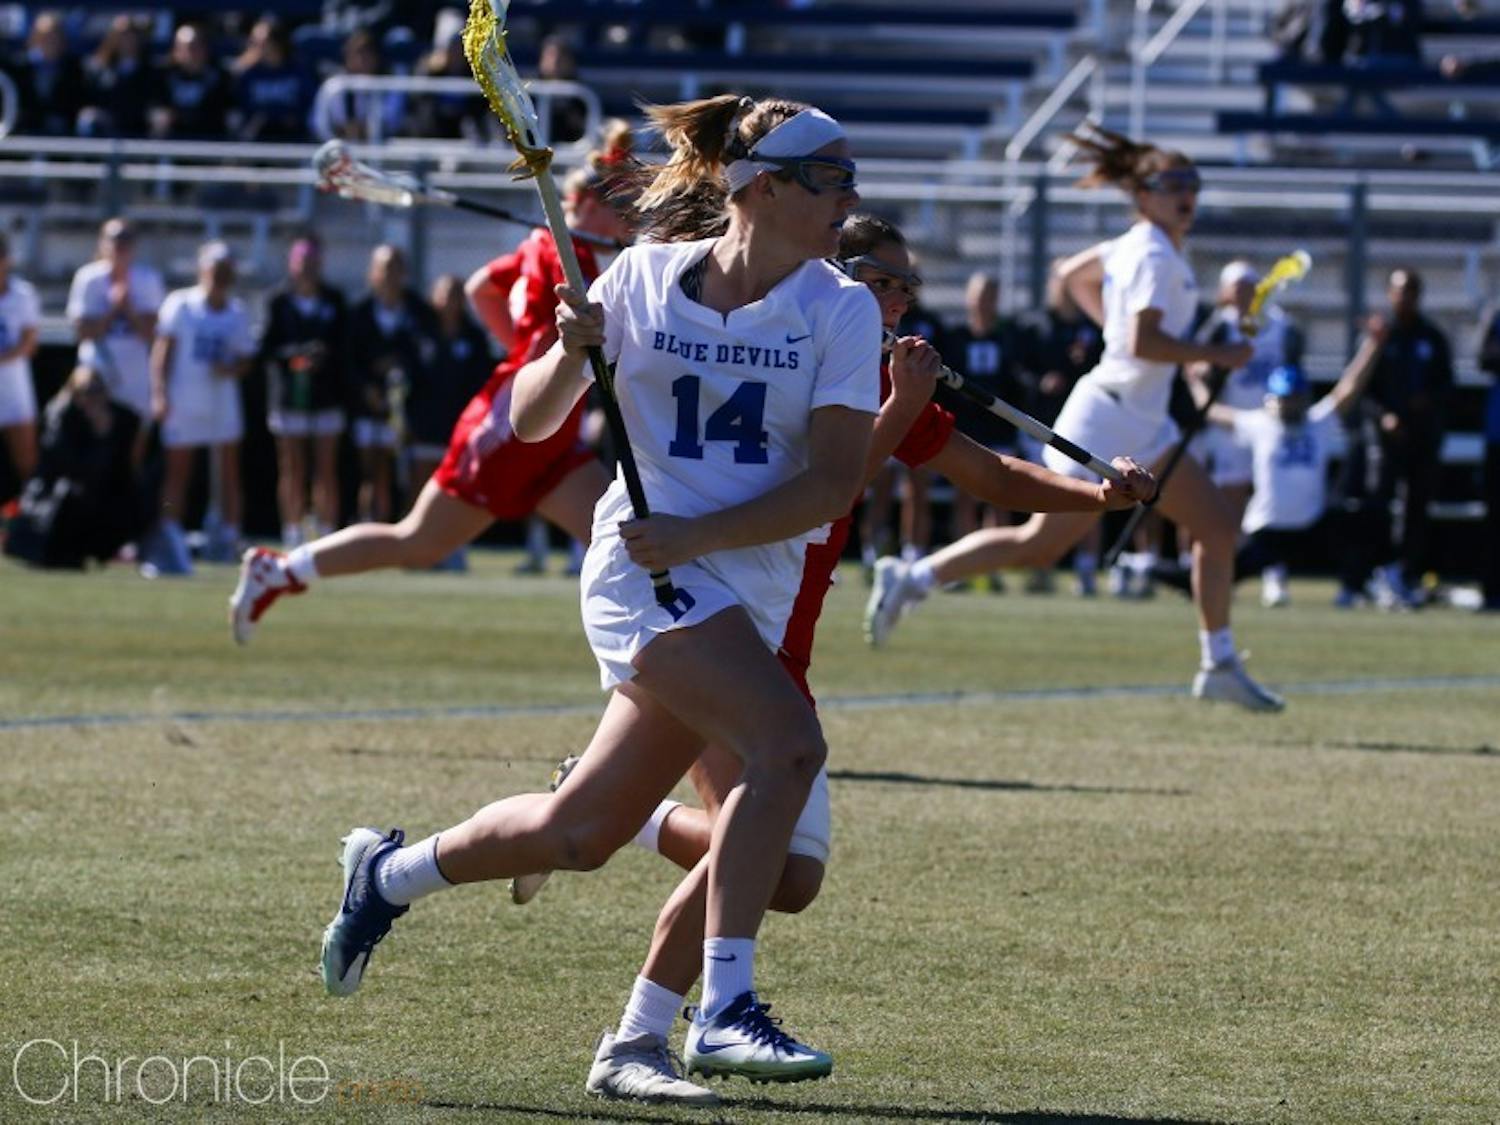 Olivia Jenner will need to be at her best with draw controls against Virginia Tech.